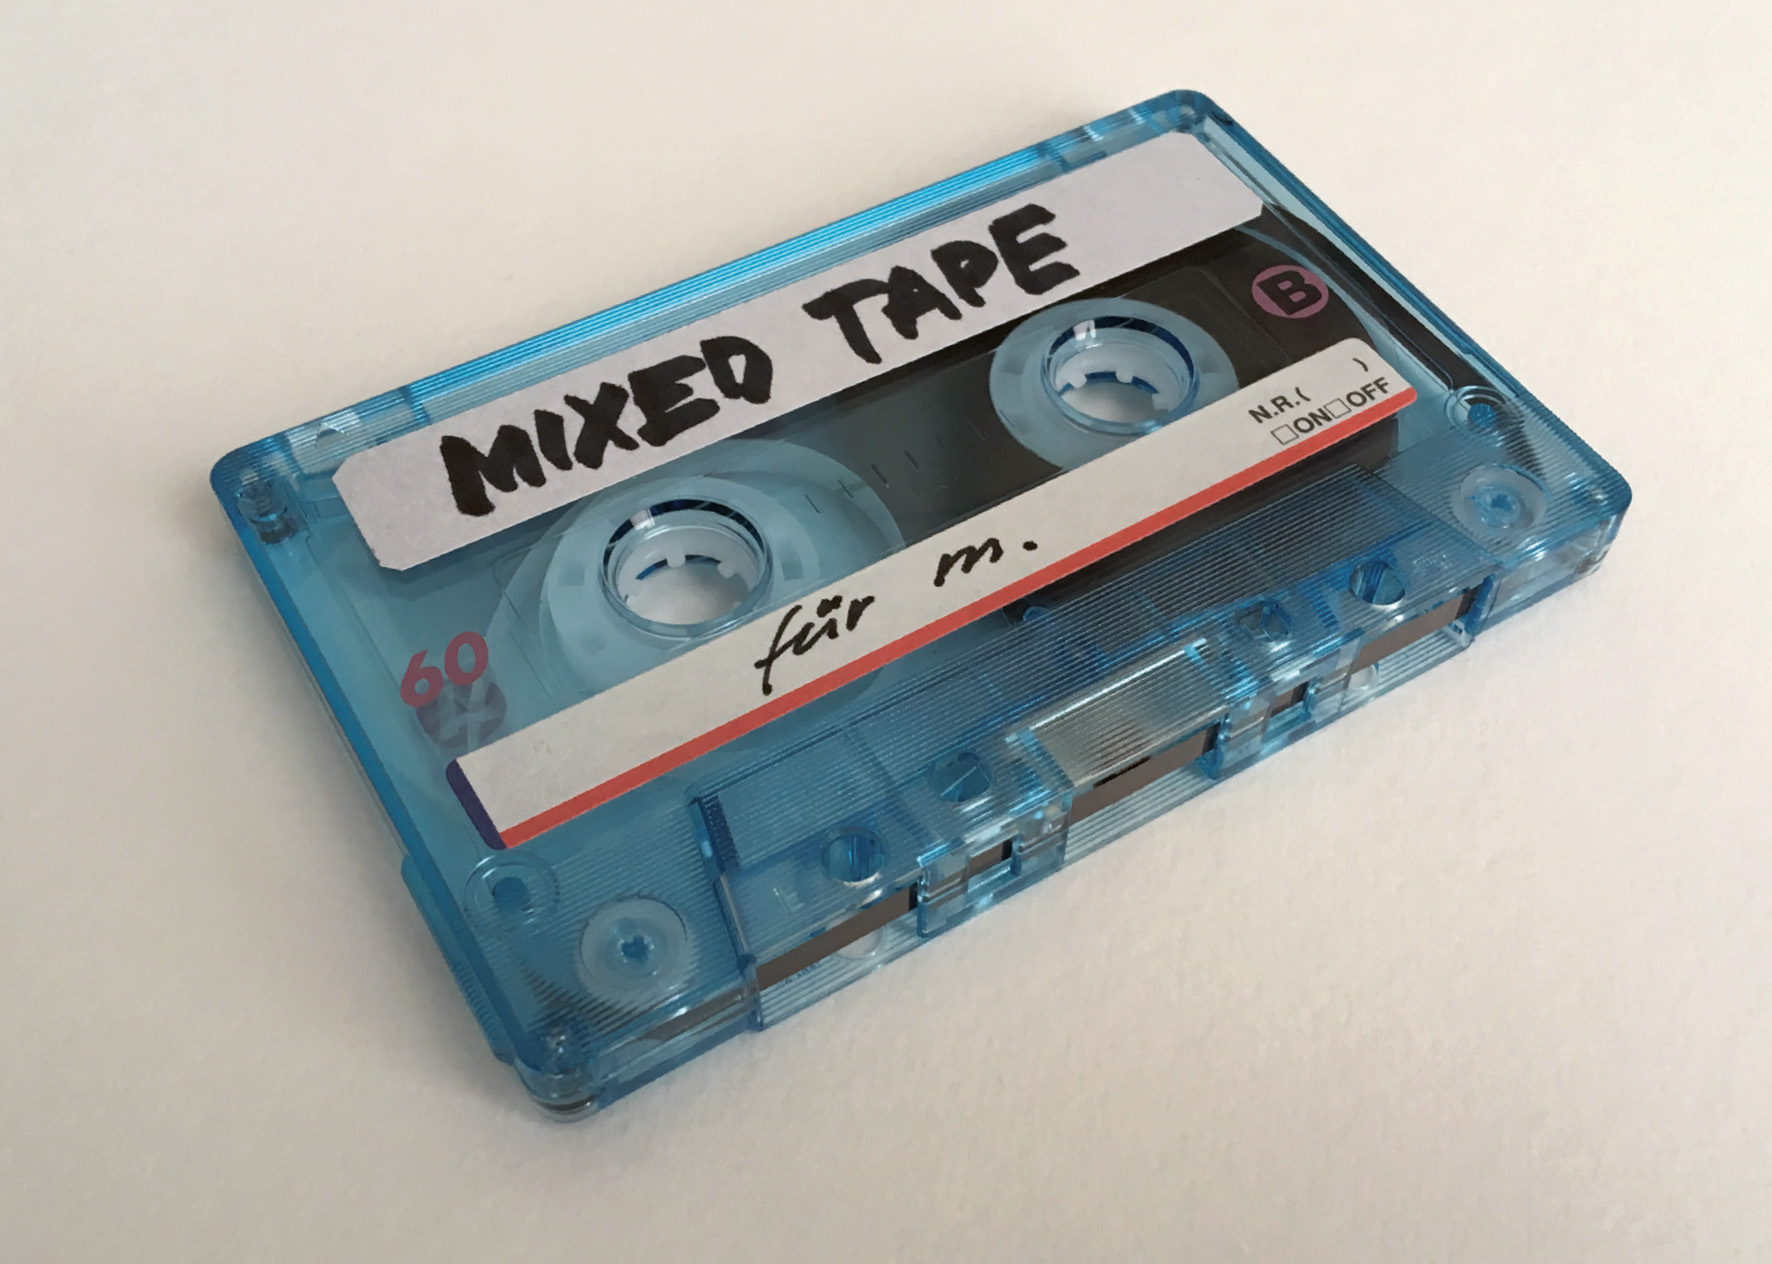 Mixed tape